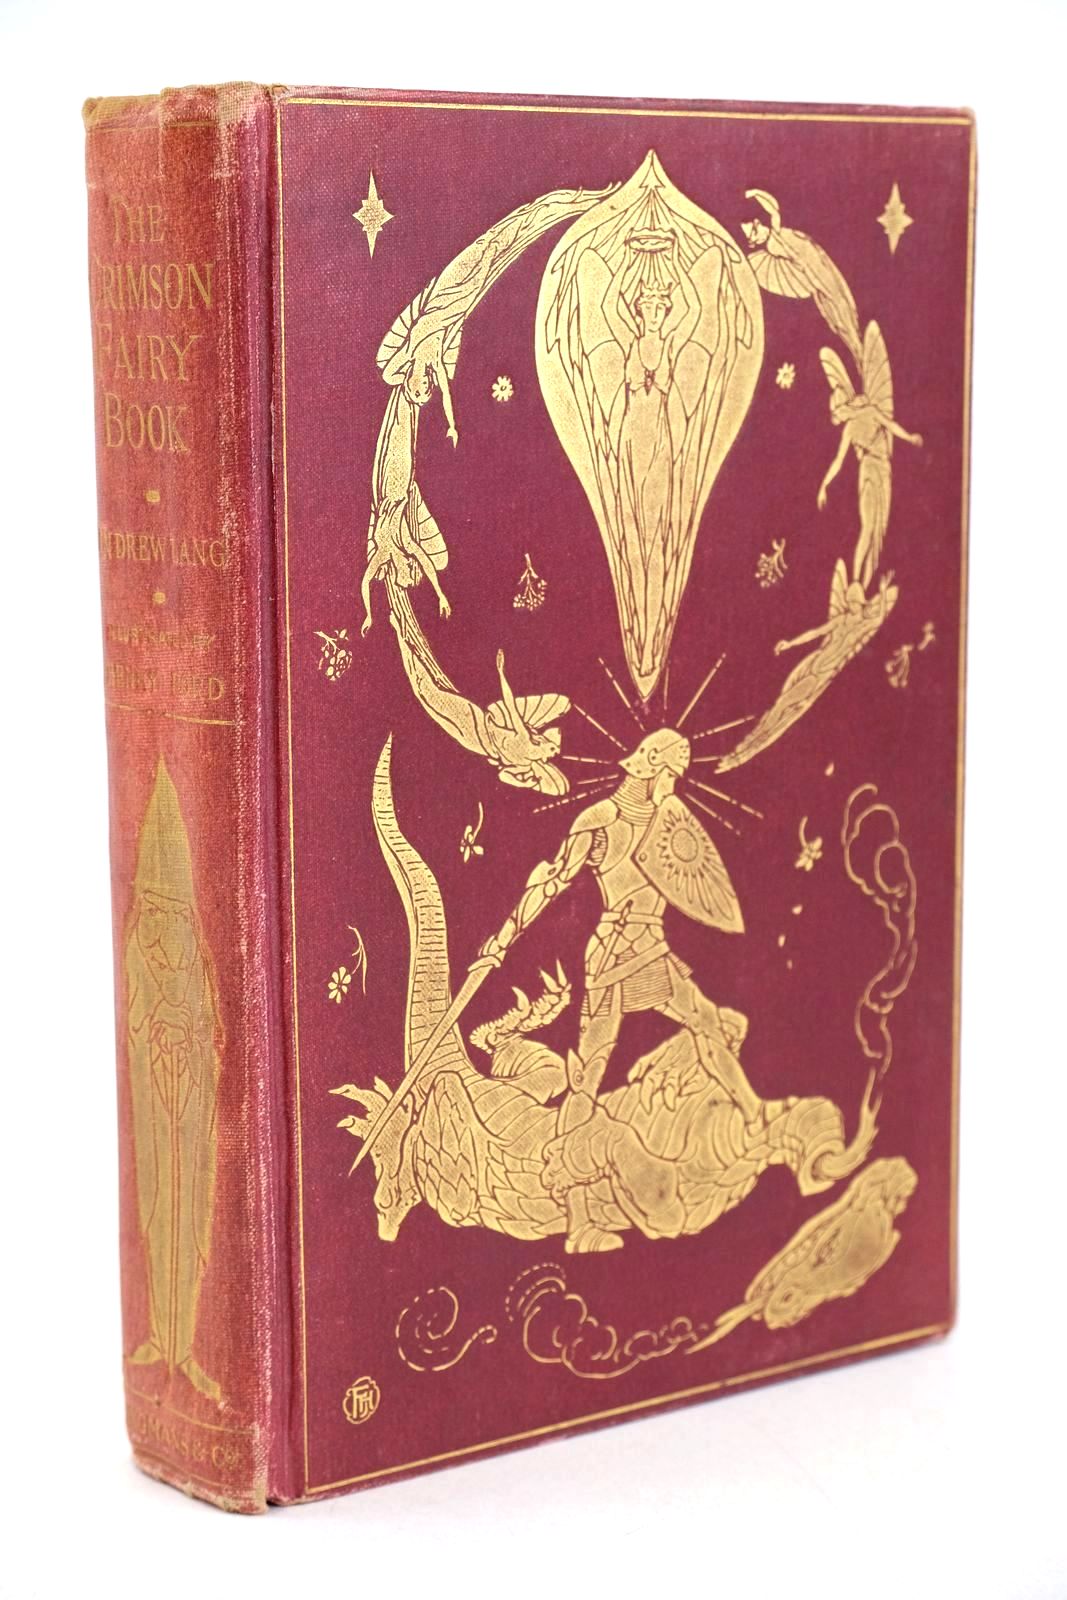 Photo of THE CRIMSON FAIRY BOOK- Stock Number: 1327886